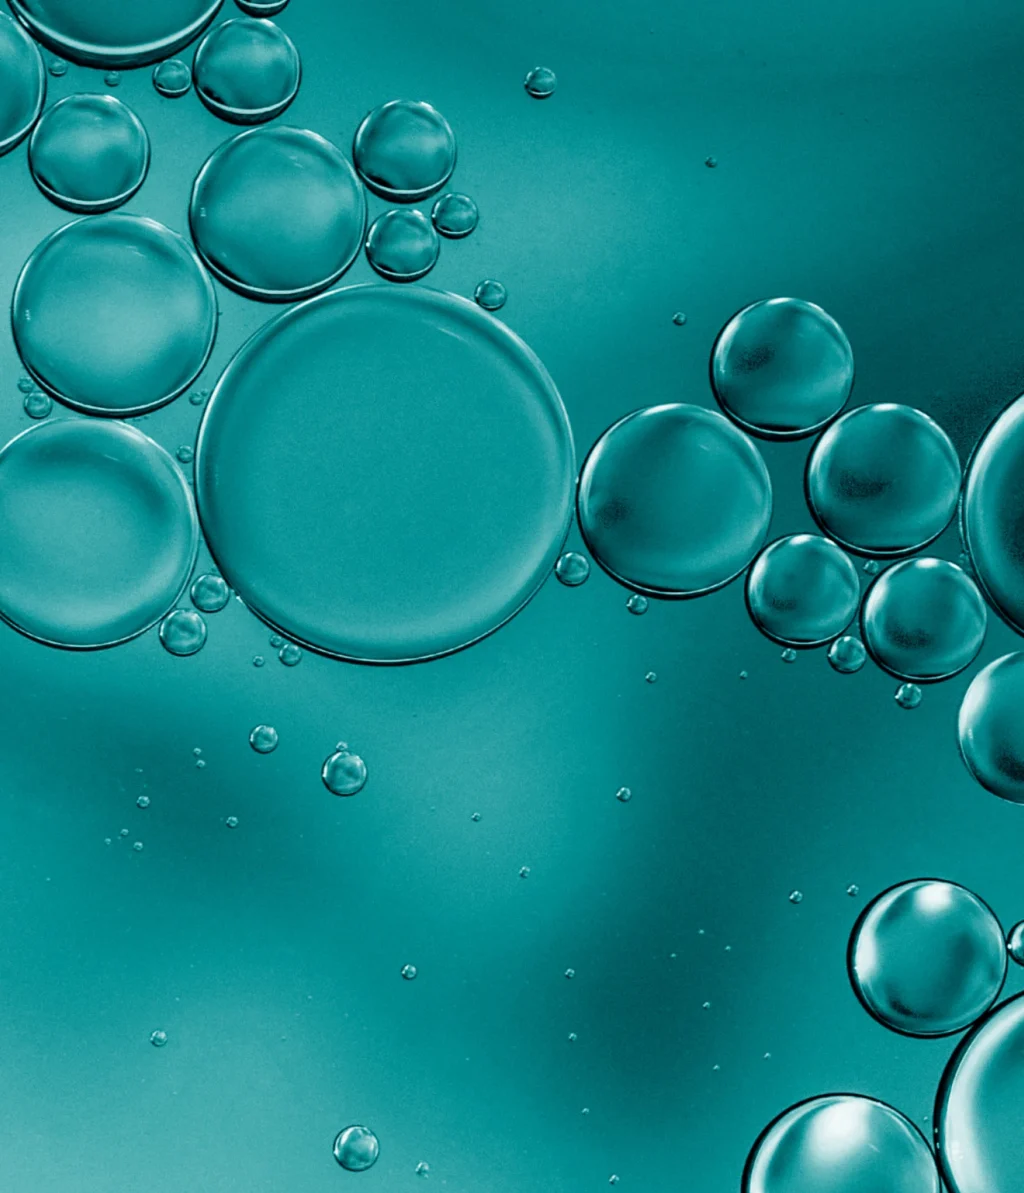 Up-close image of bubbles in water